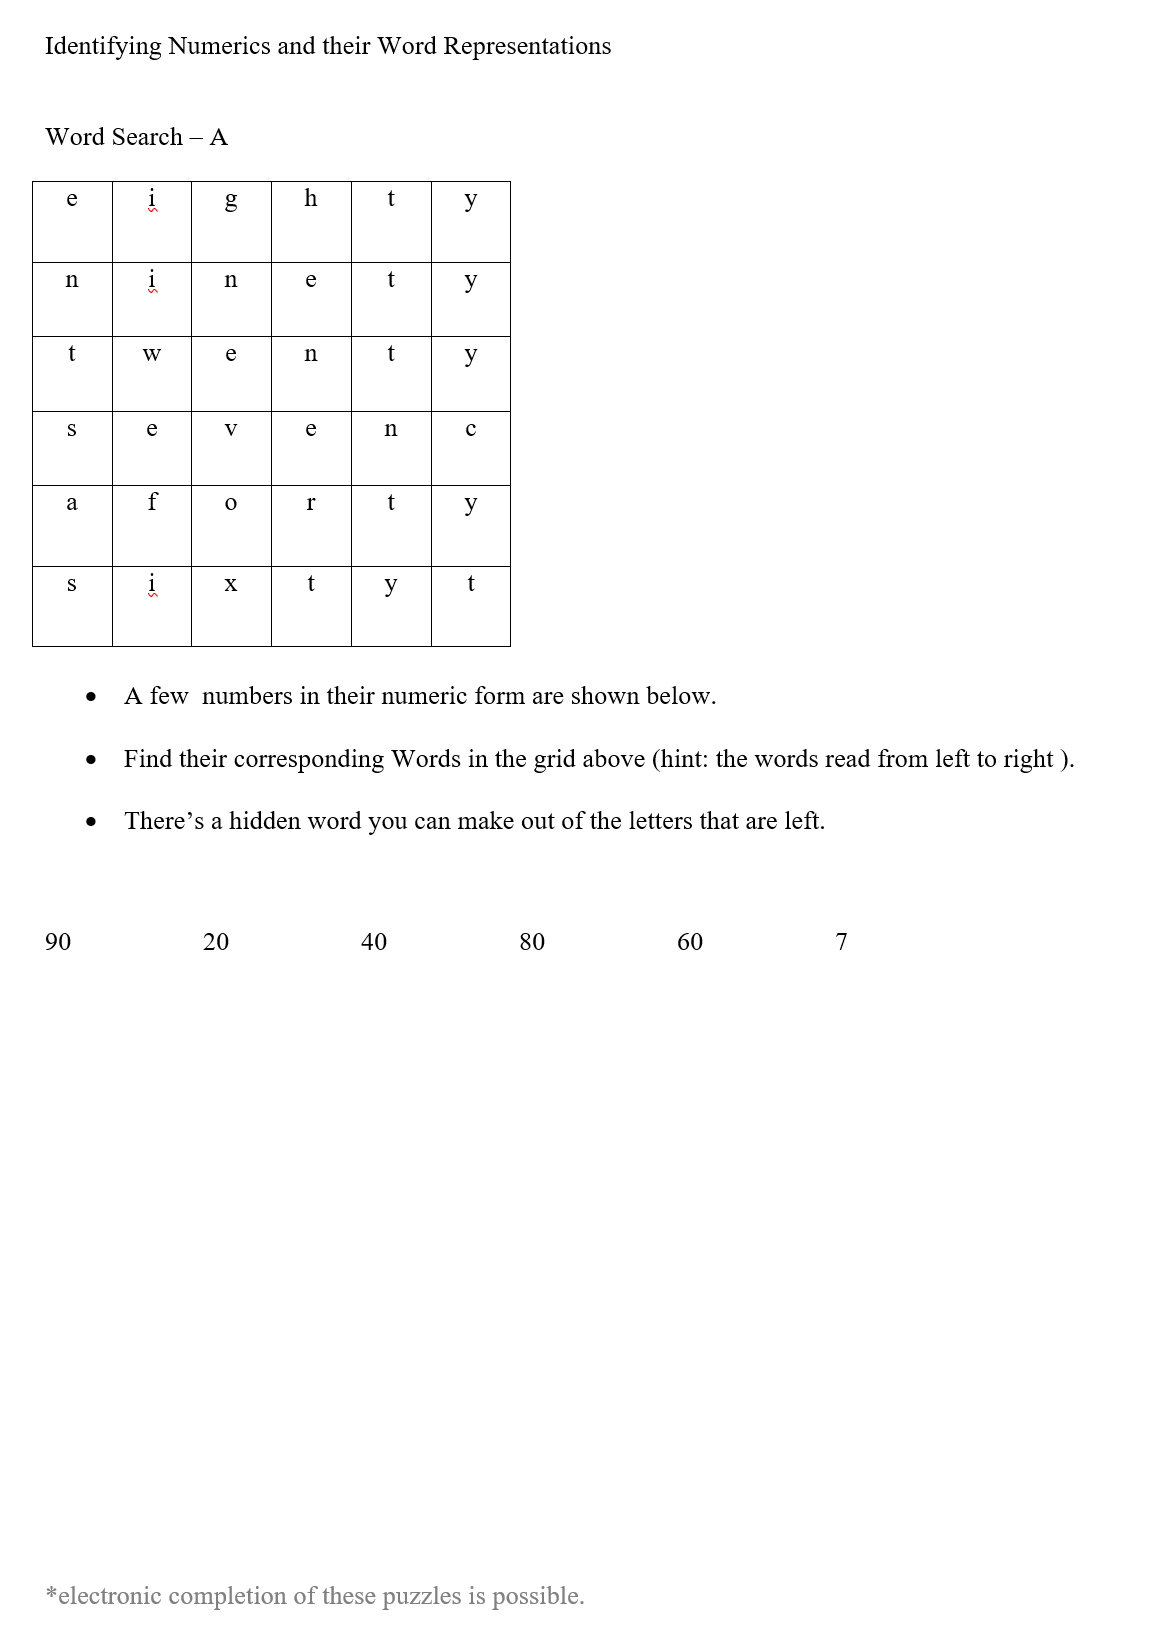 word searches re_ finding number word representations pg 1 of 4